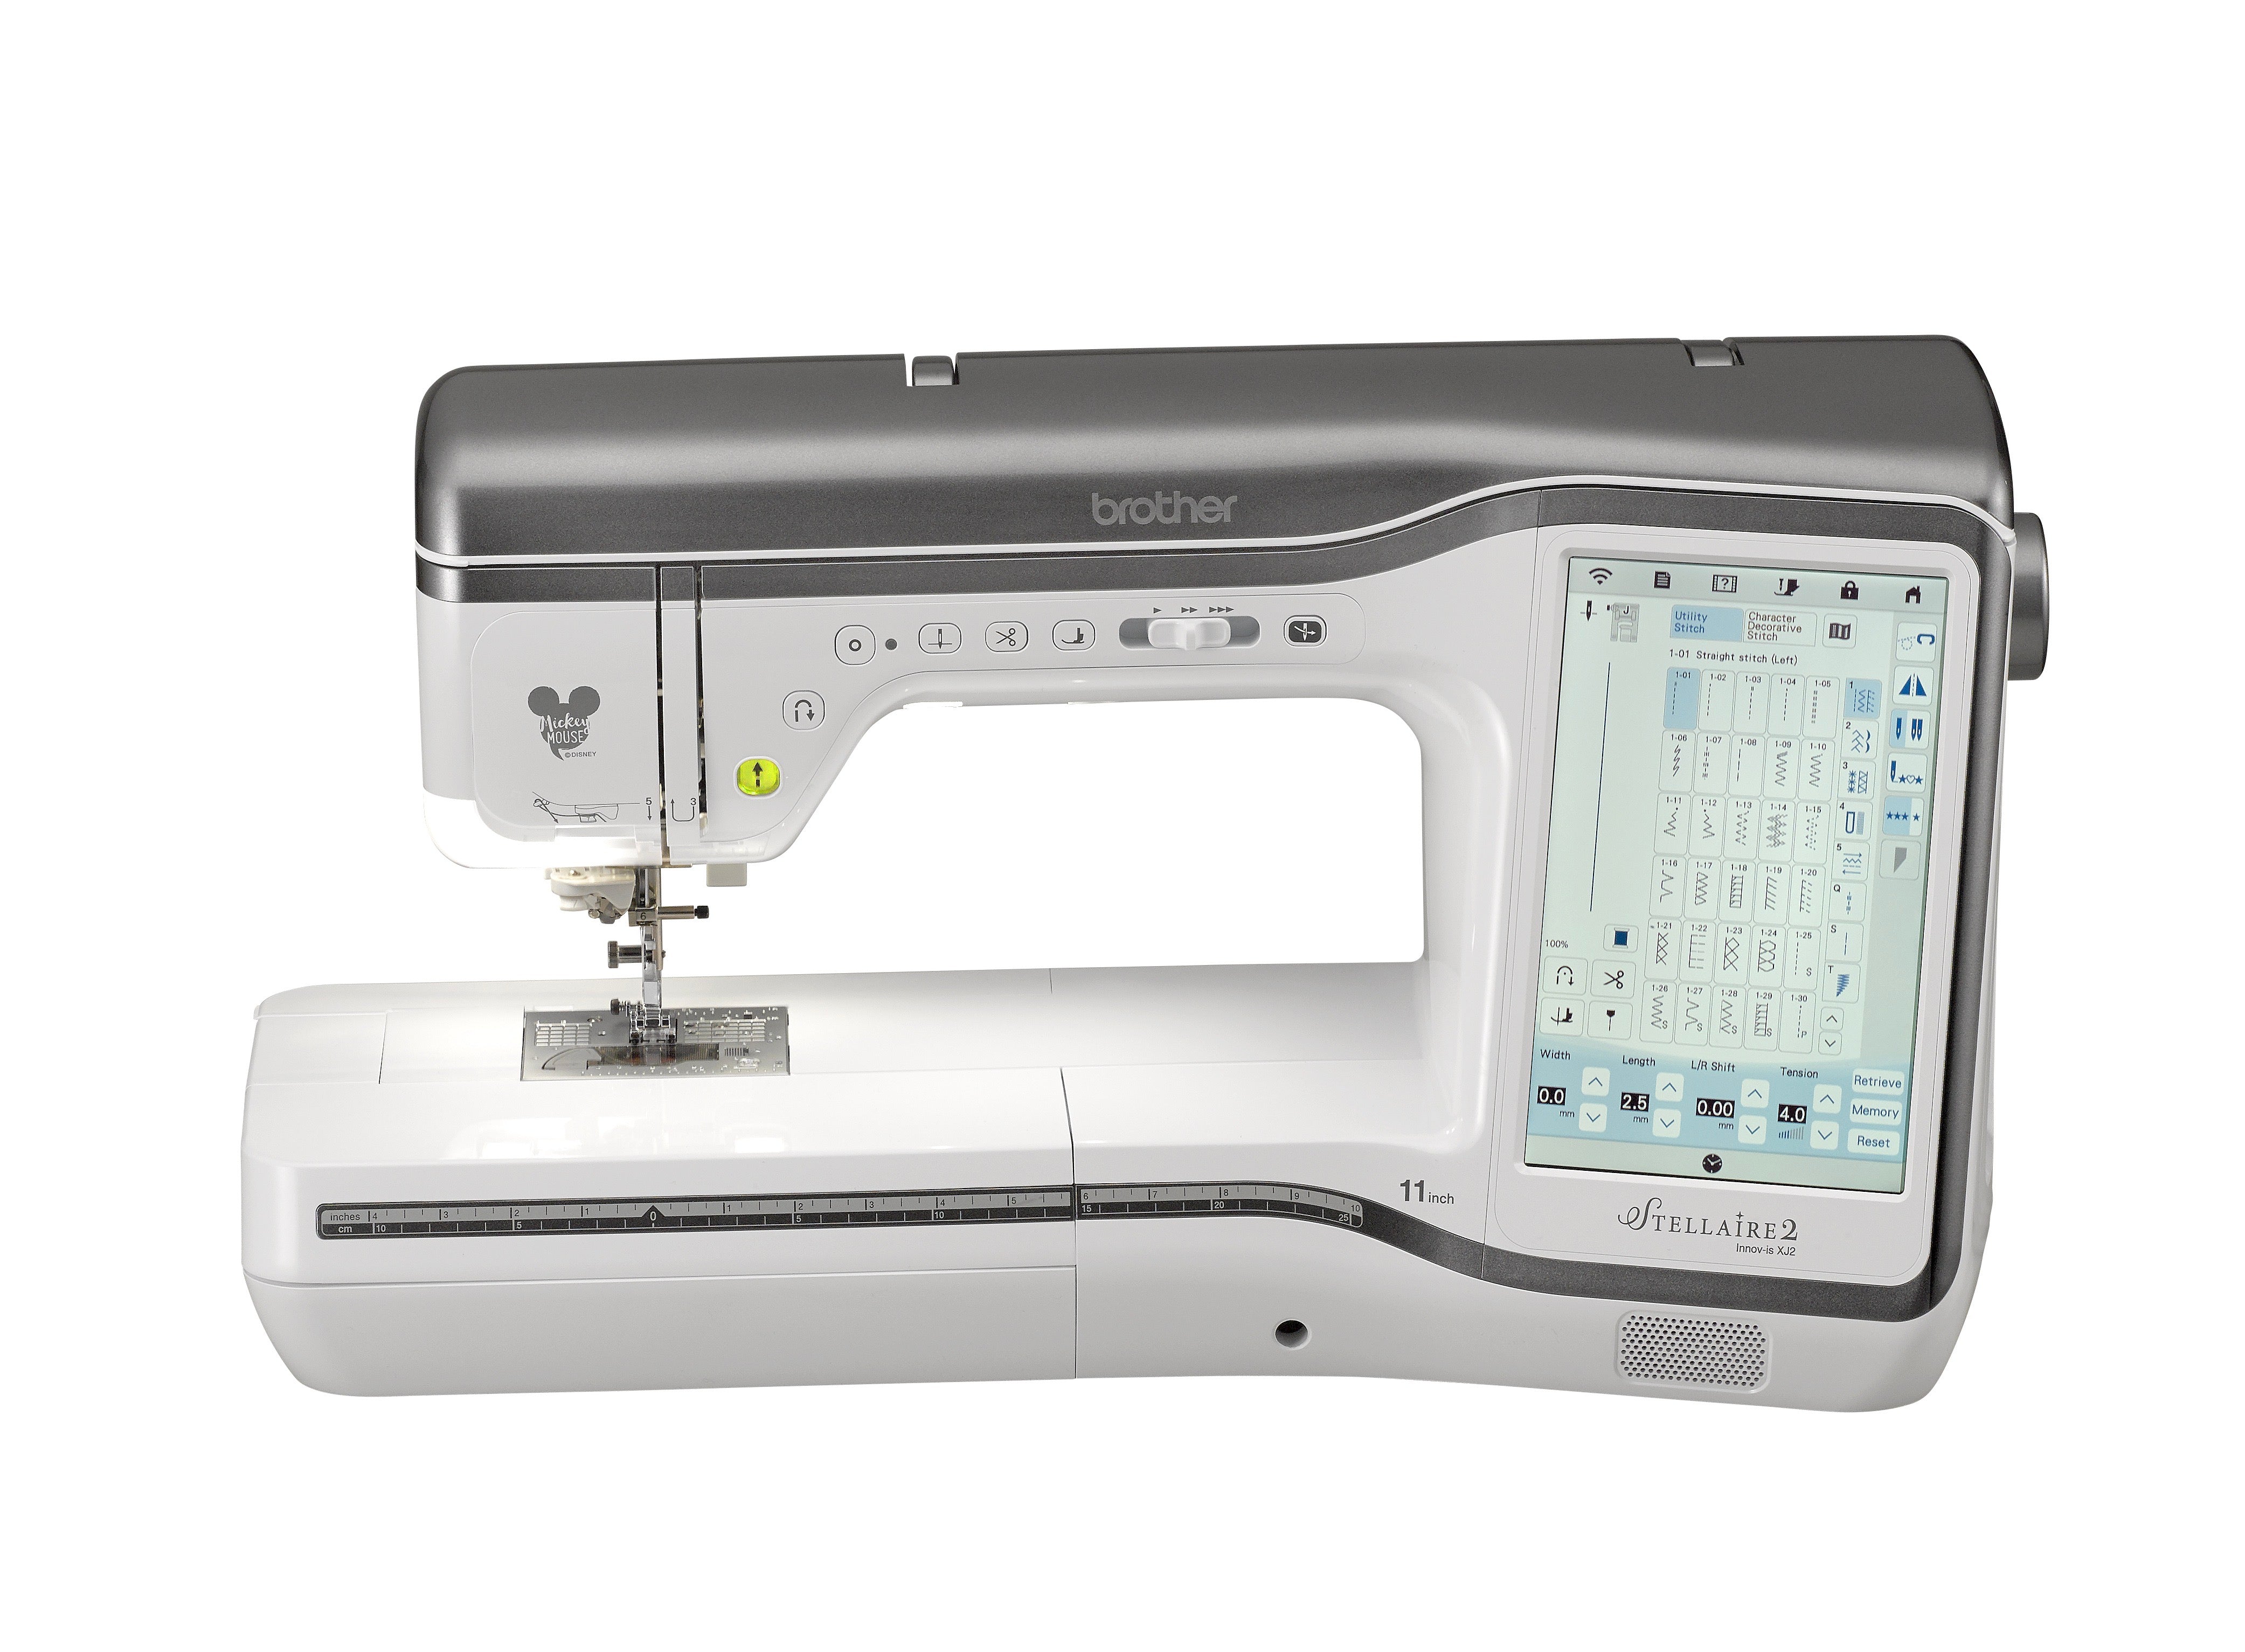 Discounted Price Original Brothers SE1900 Sewing and Embroidery